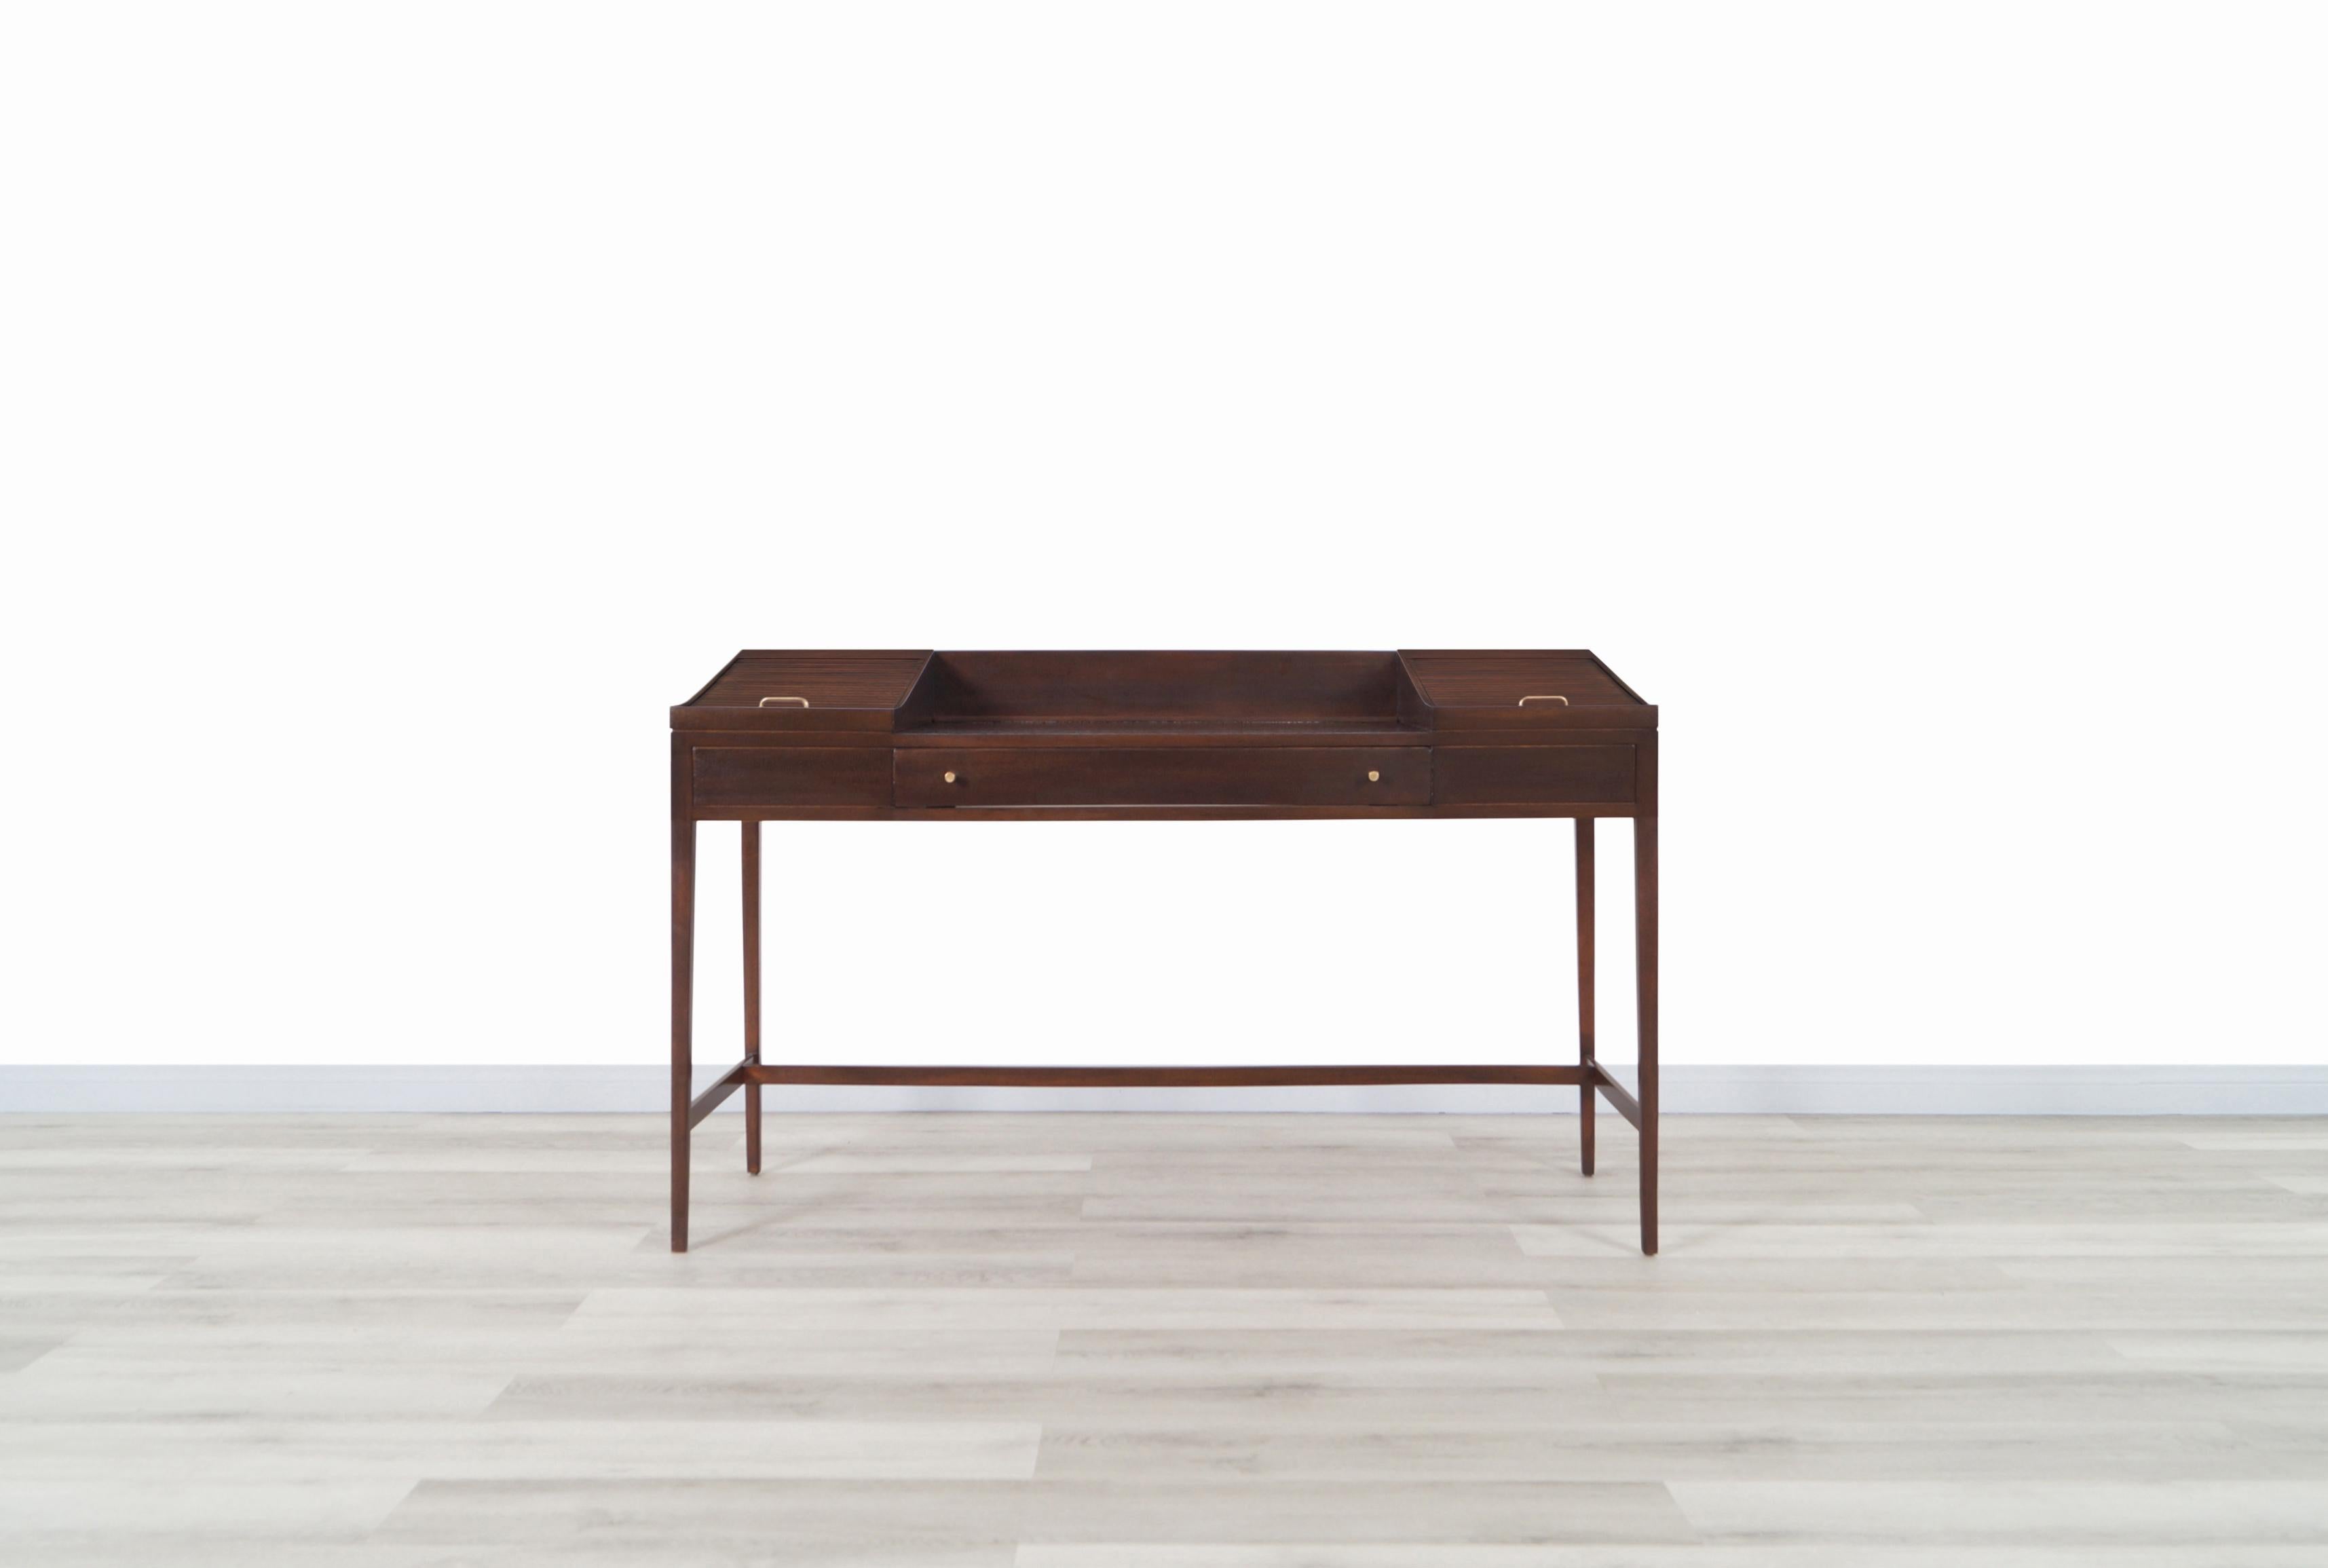 A beautiful vintage dark walnut desk manufactured in the United States, circa 1950s. Features two tambour doors that roll up, revealing one pull-out tray on each side, and the front is comprised of a large drawer for additional storage, all